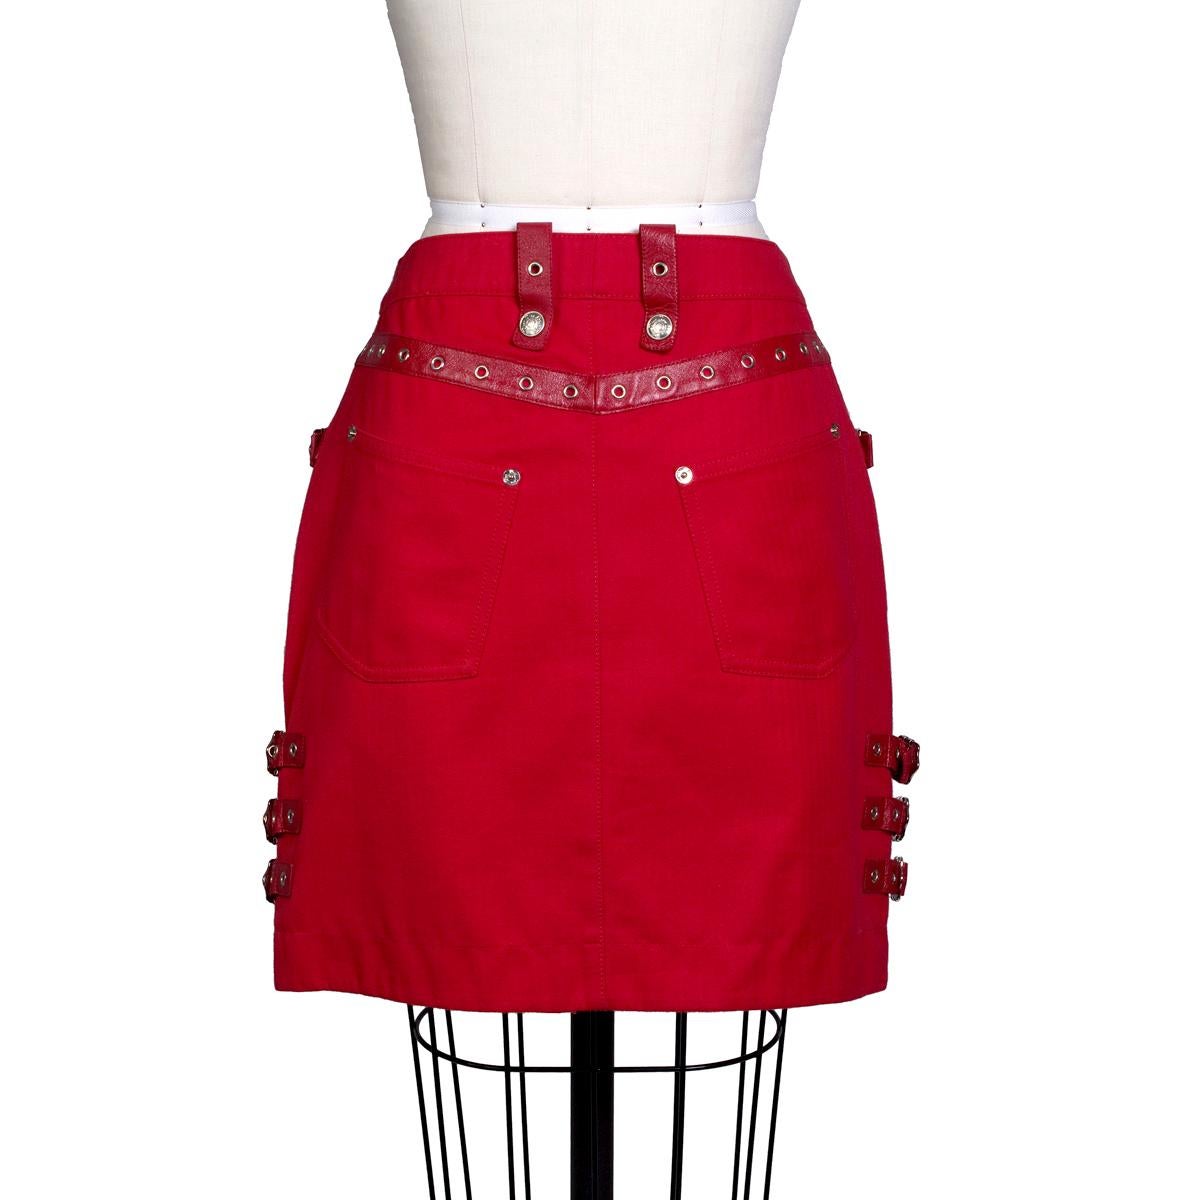 Skirt by John Galliano for Christian Dior, circa 2000s
Red cotton with red leather trim details
Also has grommets, buckles, and cinch details
Condition: Excellent

Size/Measurements:
Size 8
29